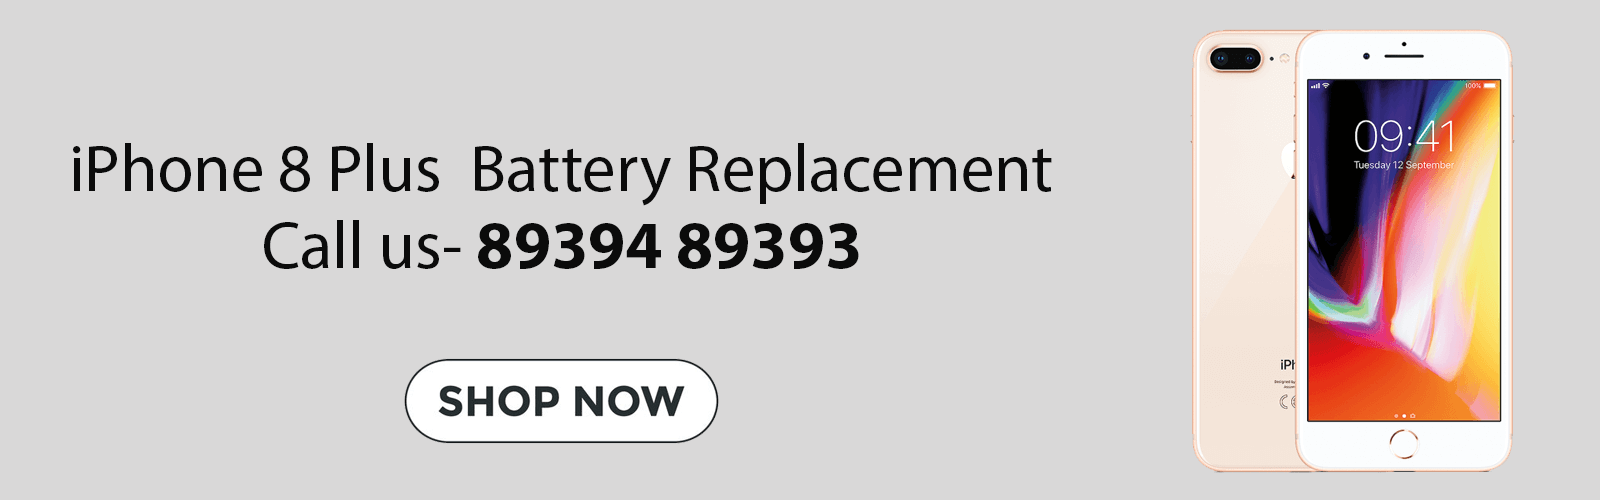 iPhone 8 Battery Replacement Price Chennai